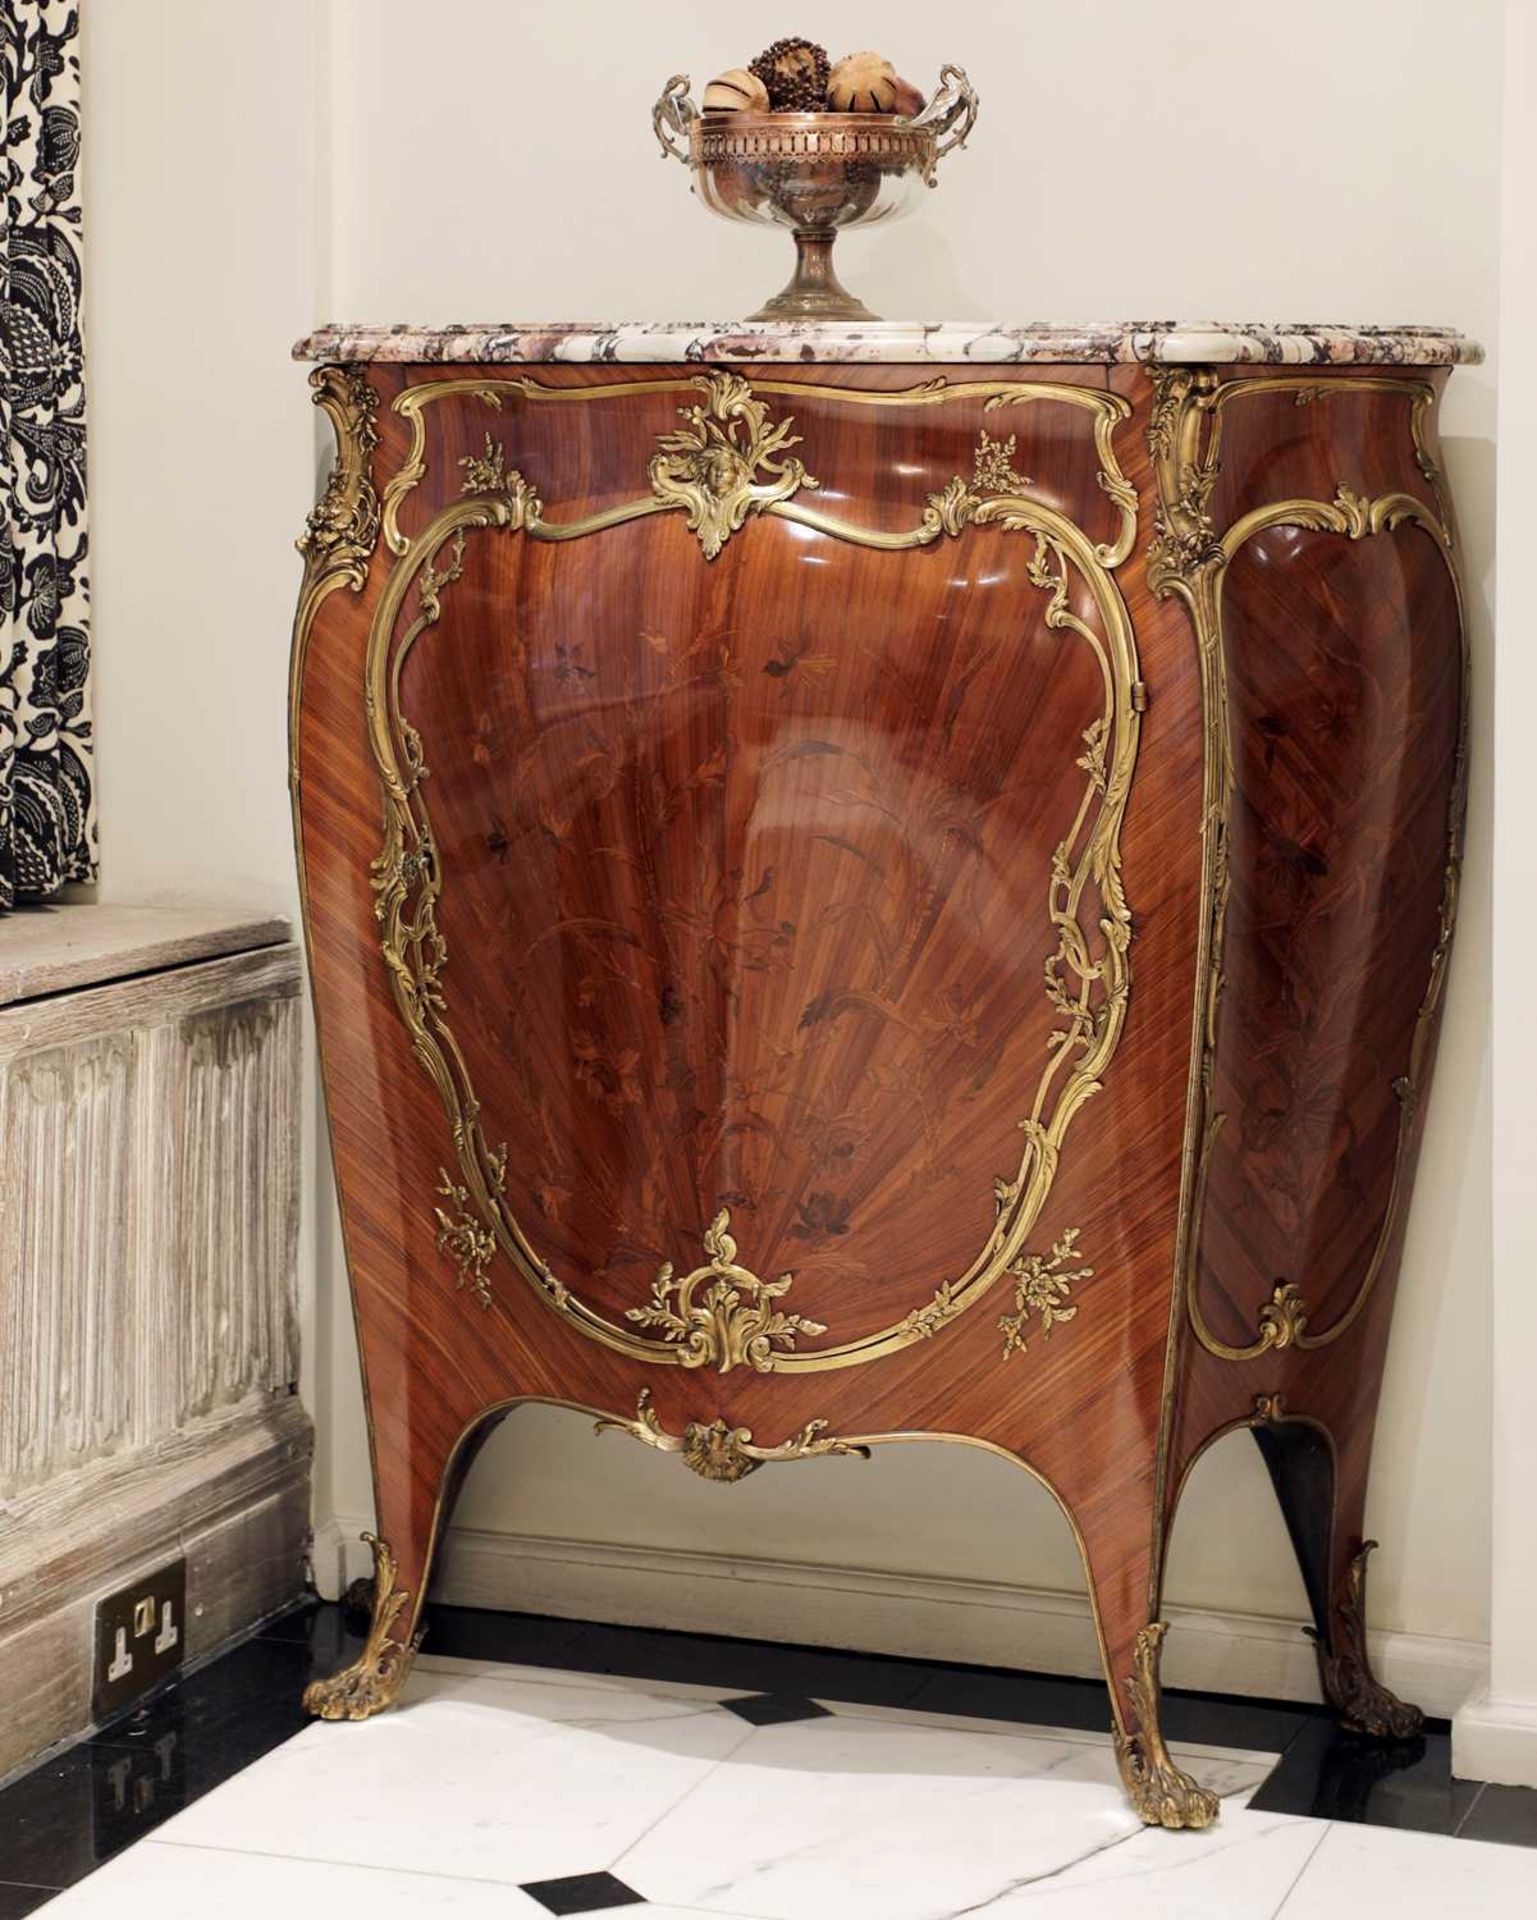 A French Louis XV-style amaranth and kingwood meuble d'appui, - Image 2 of 80